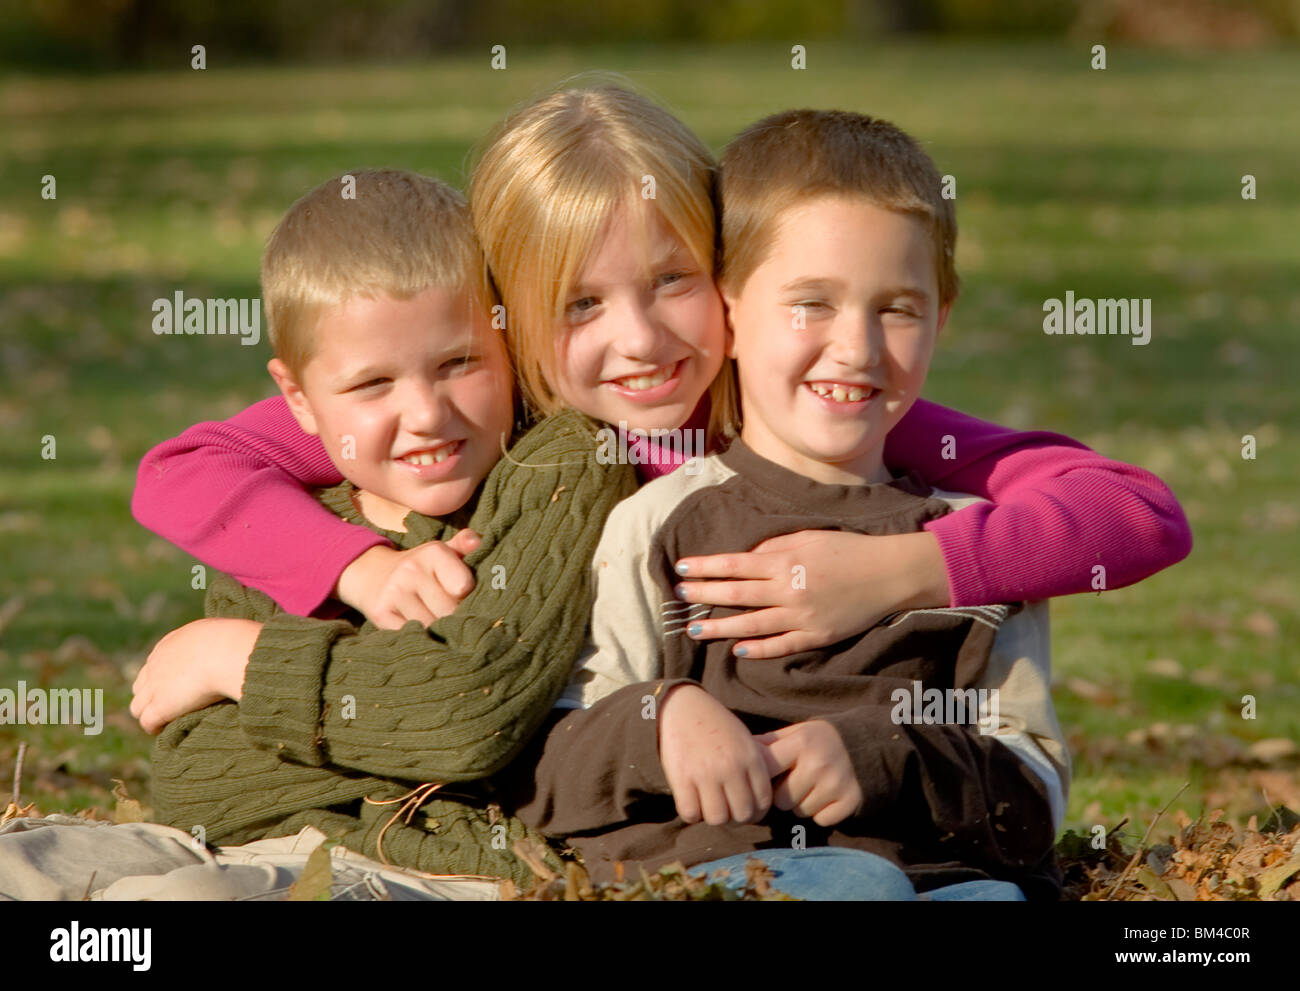 Children sitting in a pile of Autumn leaves Stock Photo